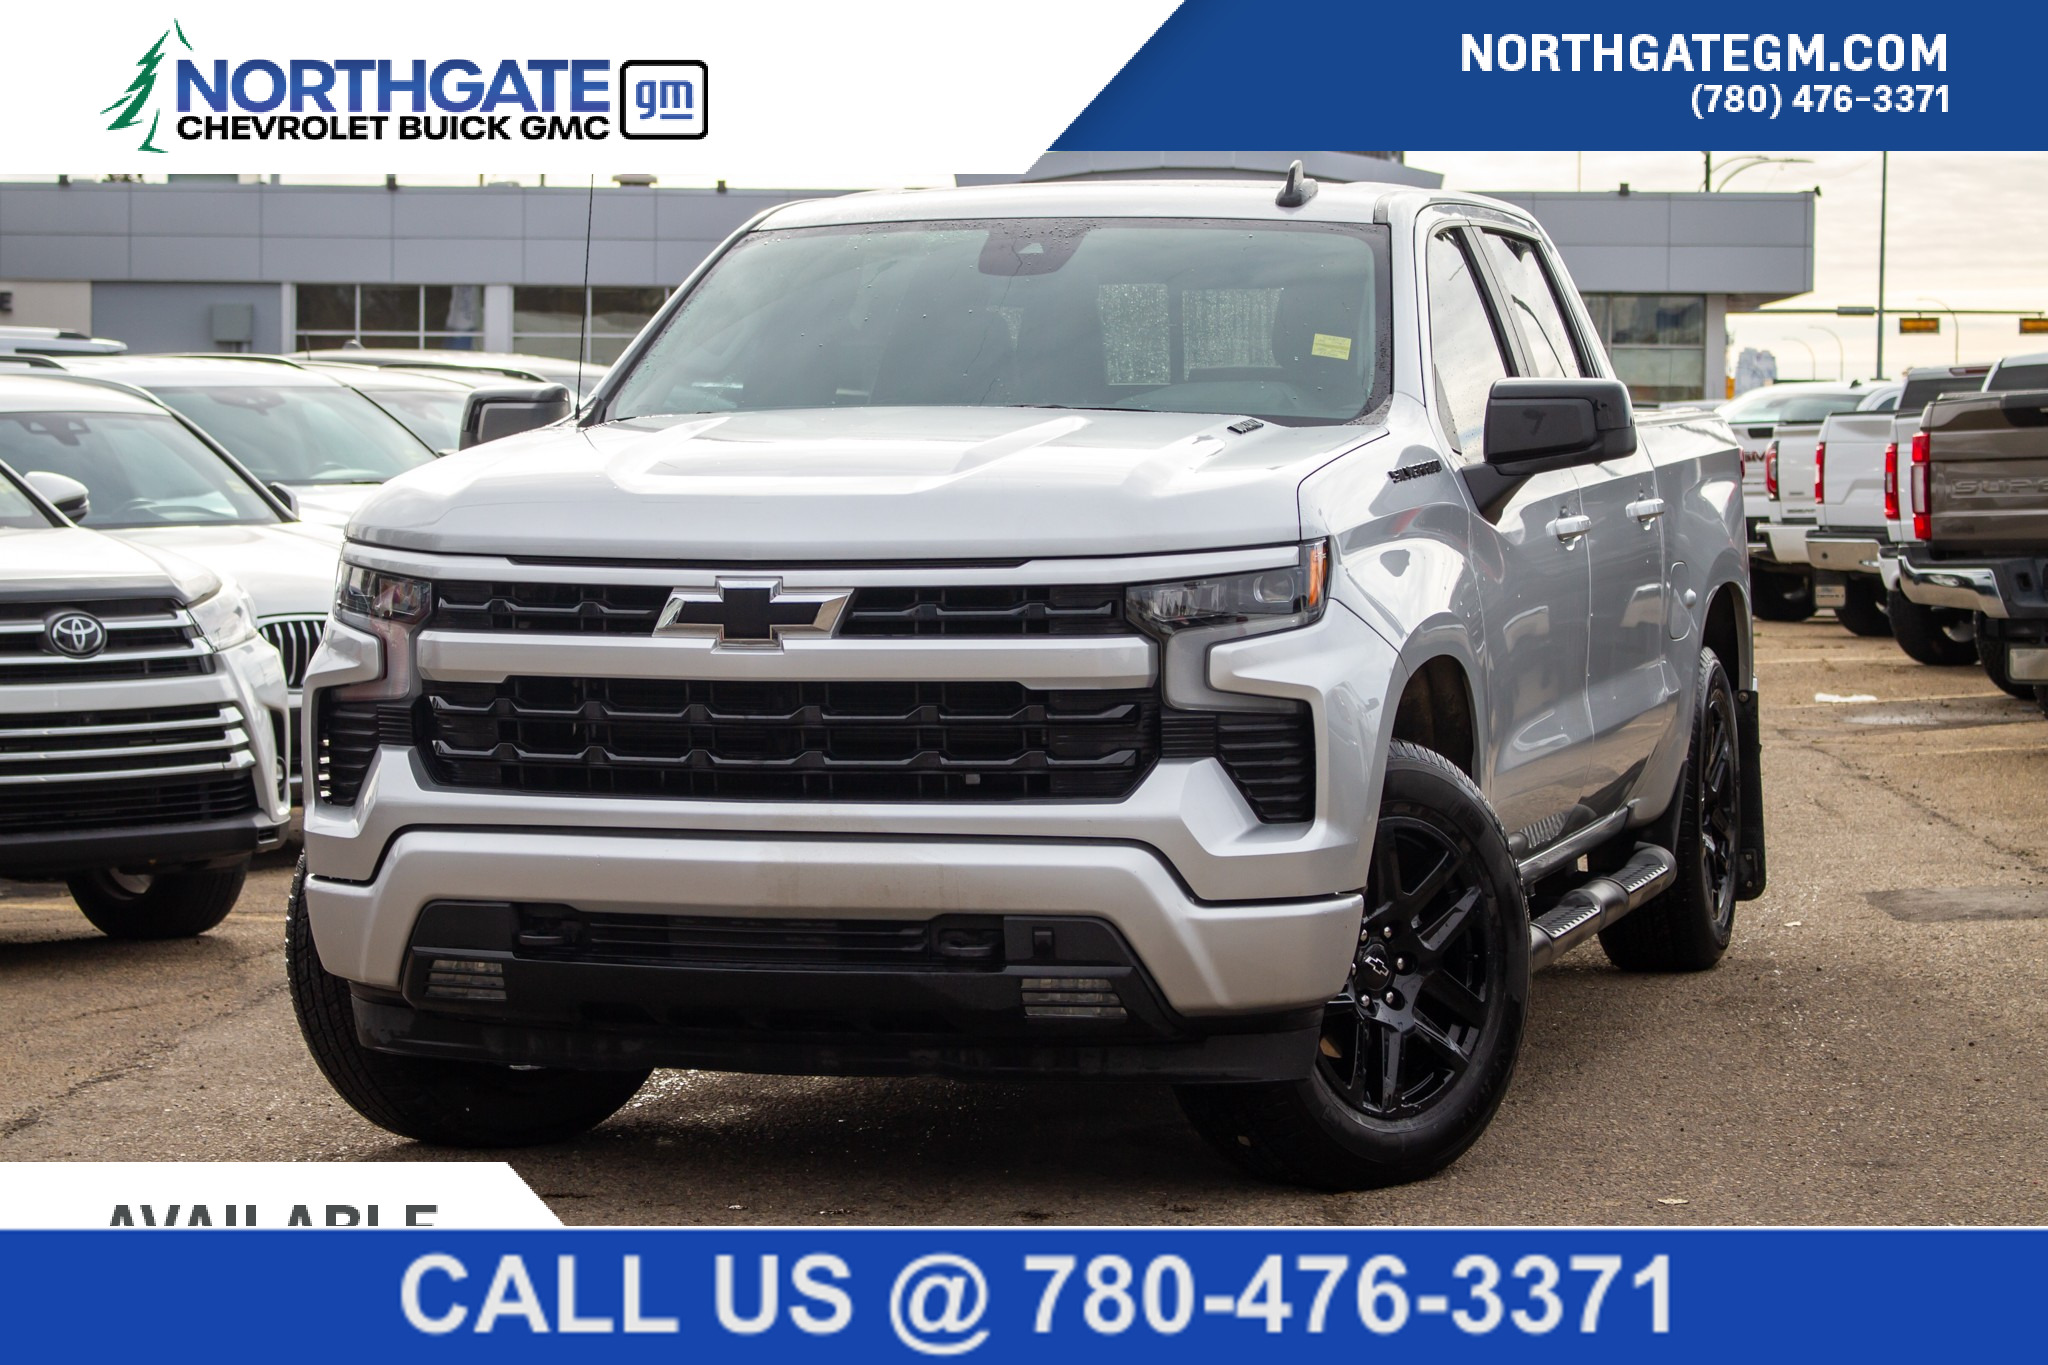 2022 Chevrolet Silverado 1500 RST RST | 3.0L DIESEL | HEATED LEATHER | HEATED ST